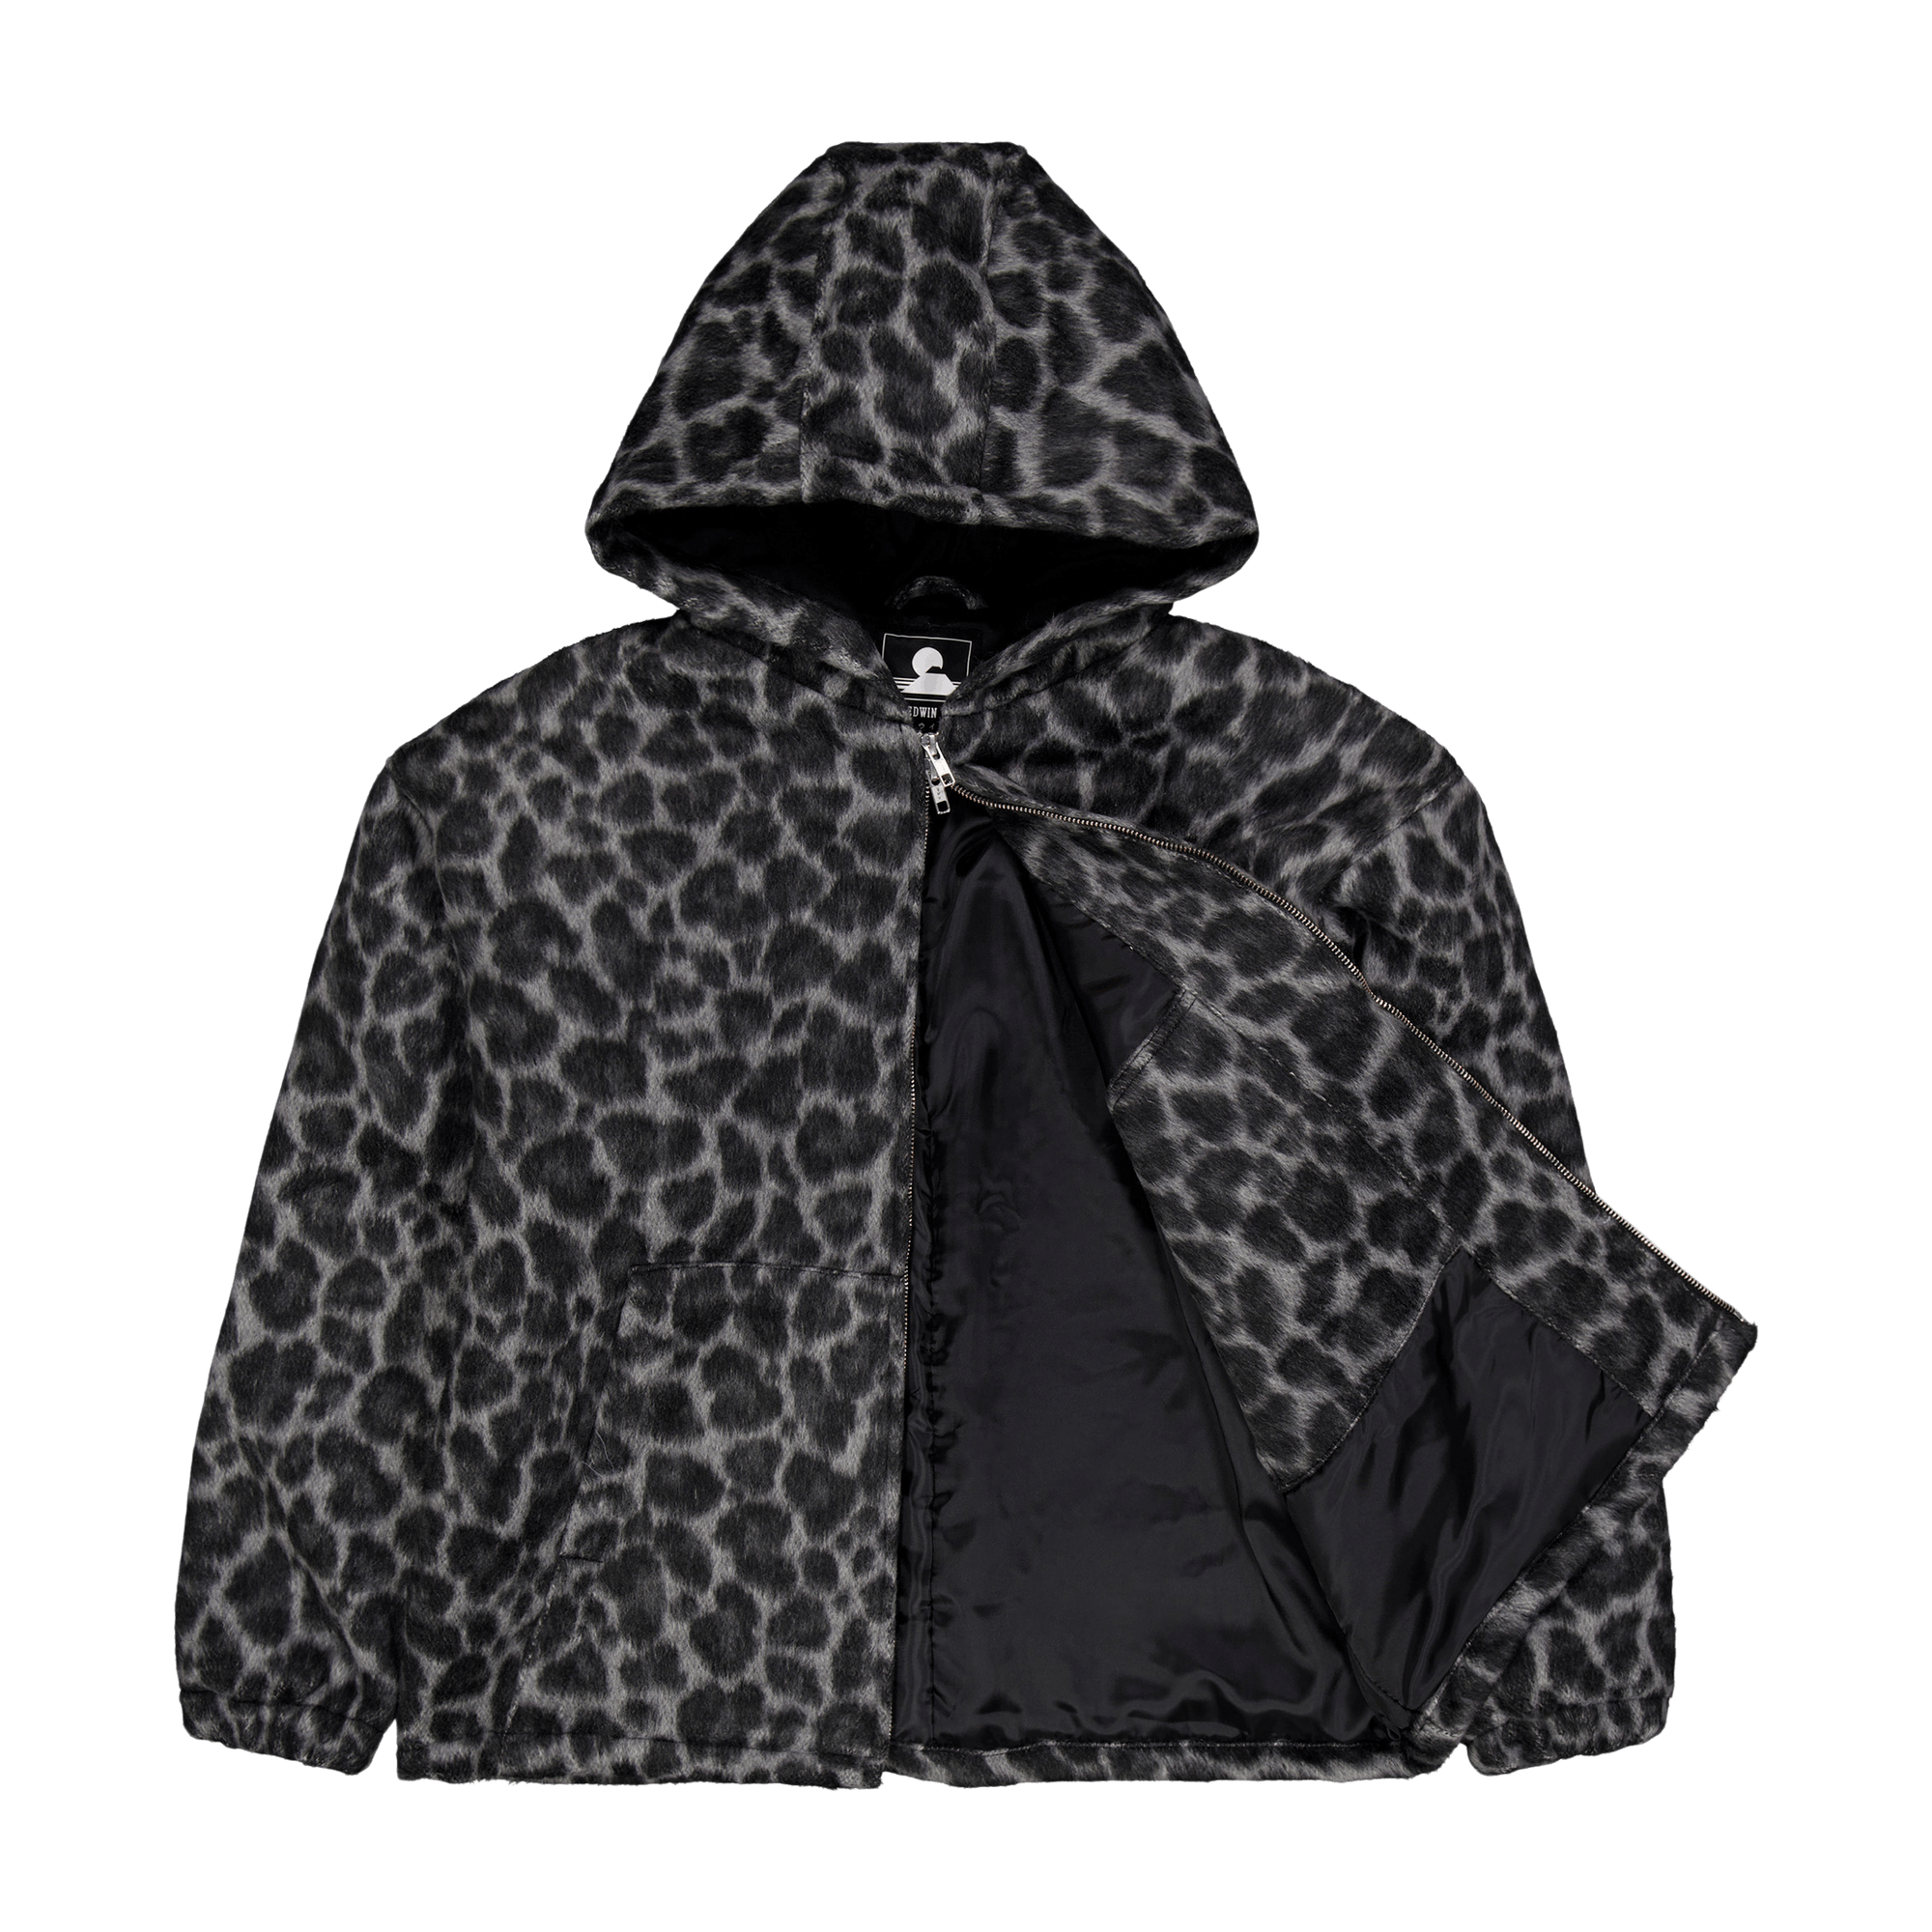 Daimon Hooded Jacket Lined Black / White Leopard